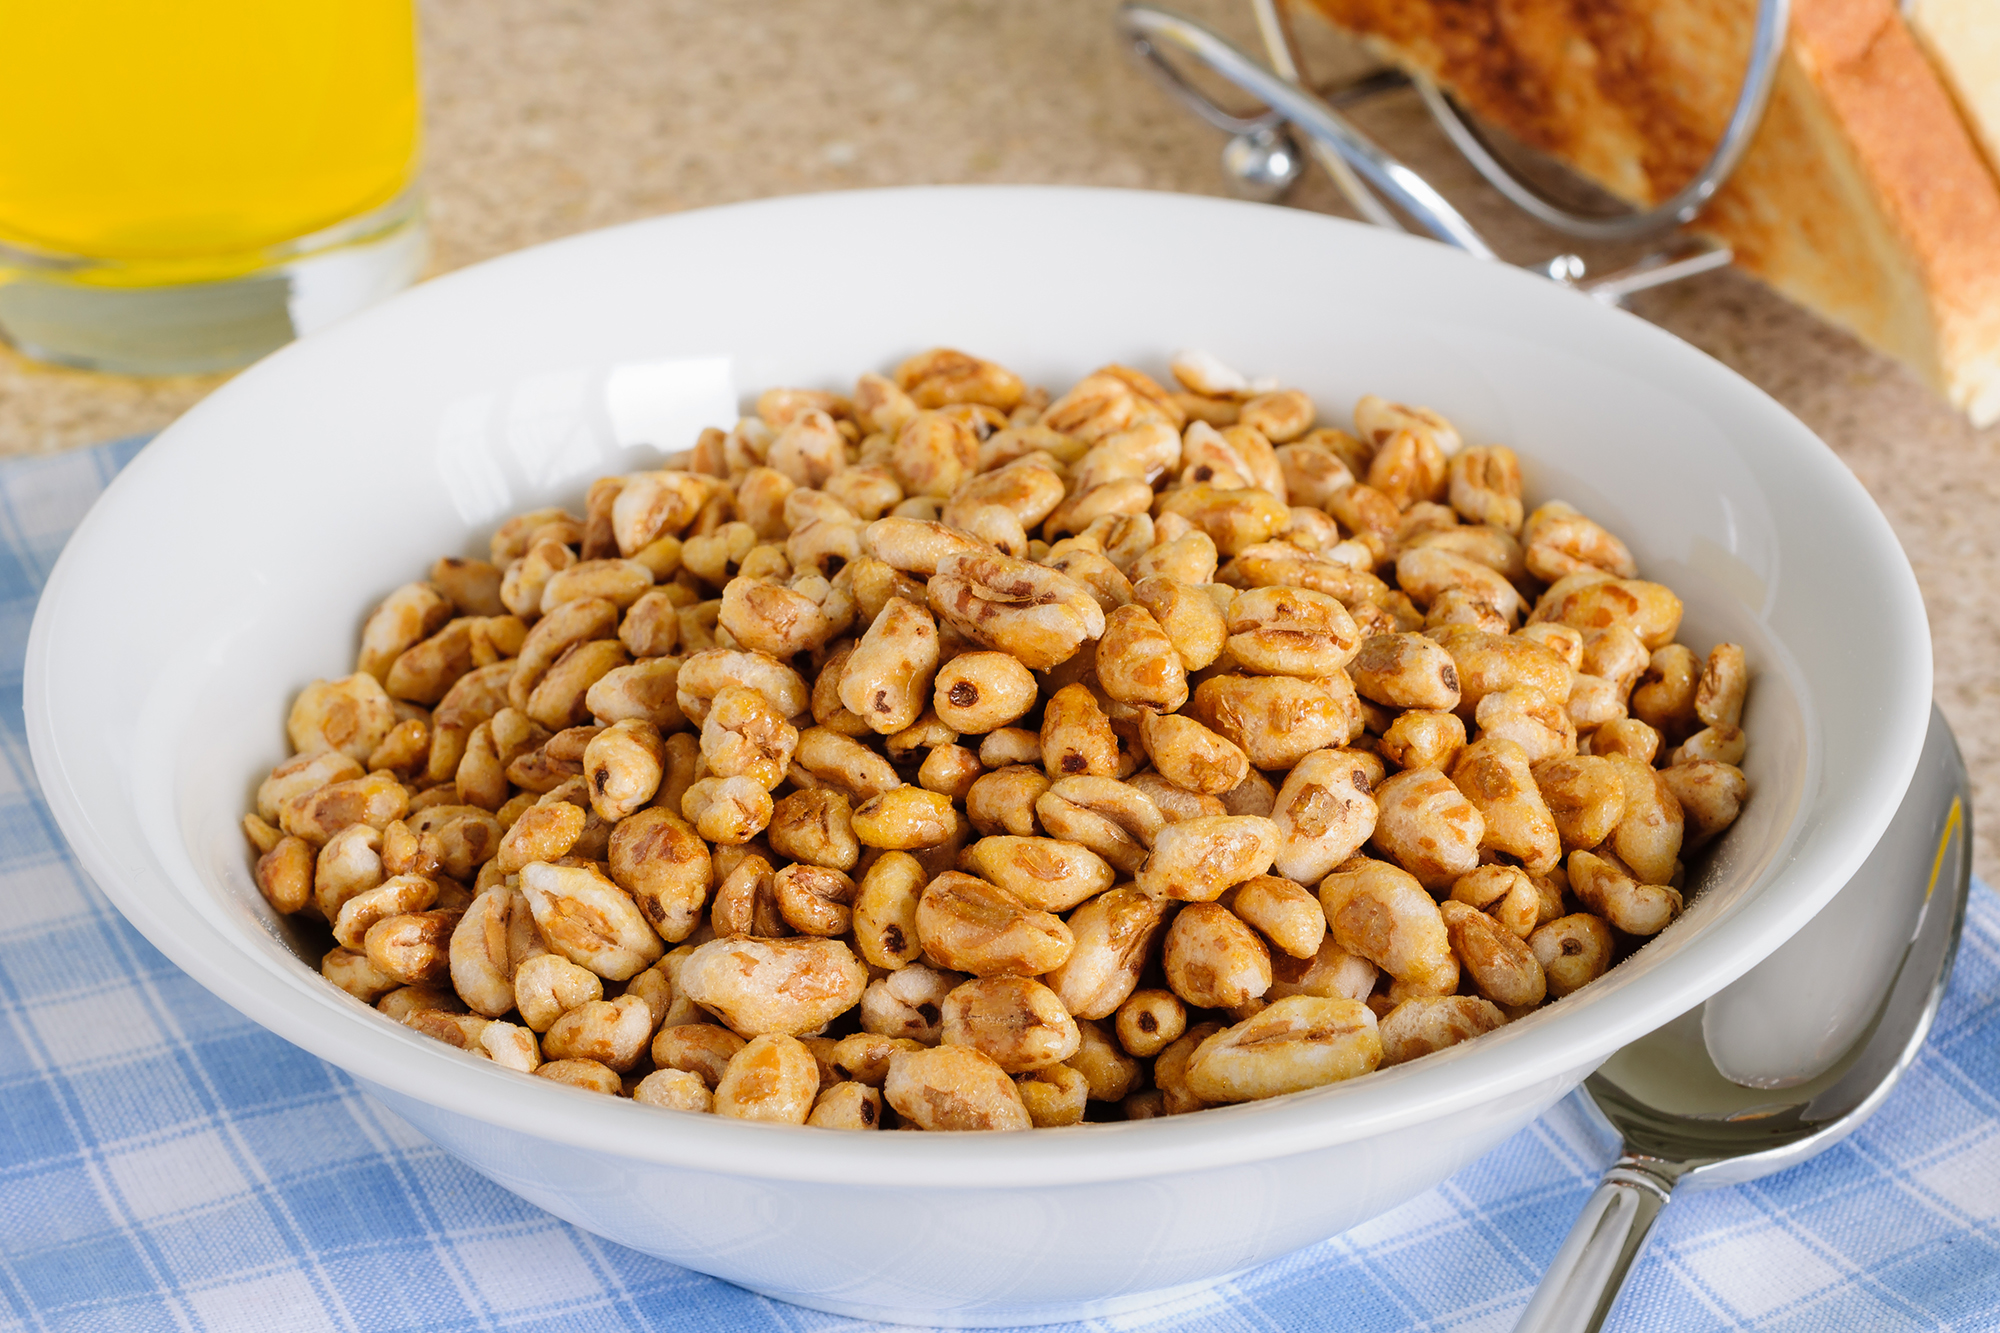 FDA: Retailers cannot legally sell Kellogg's Honey Smacks cereal following recall